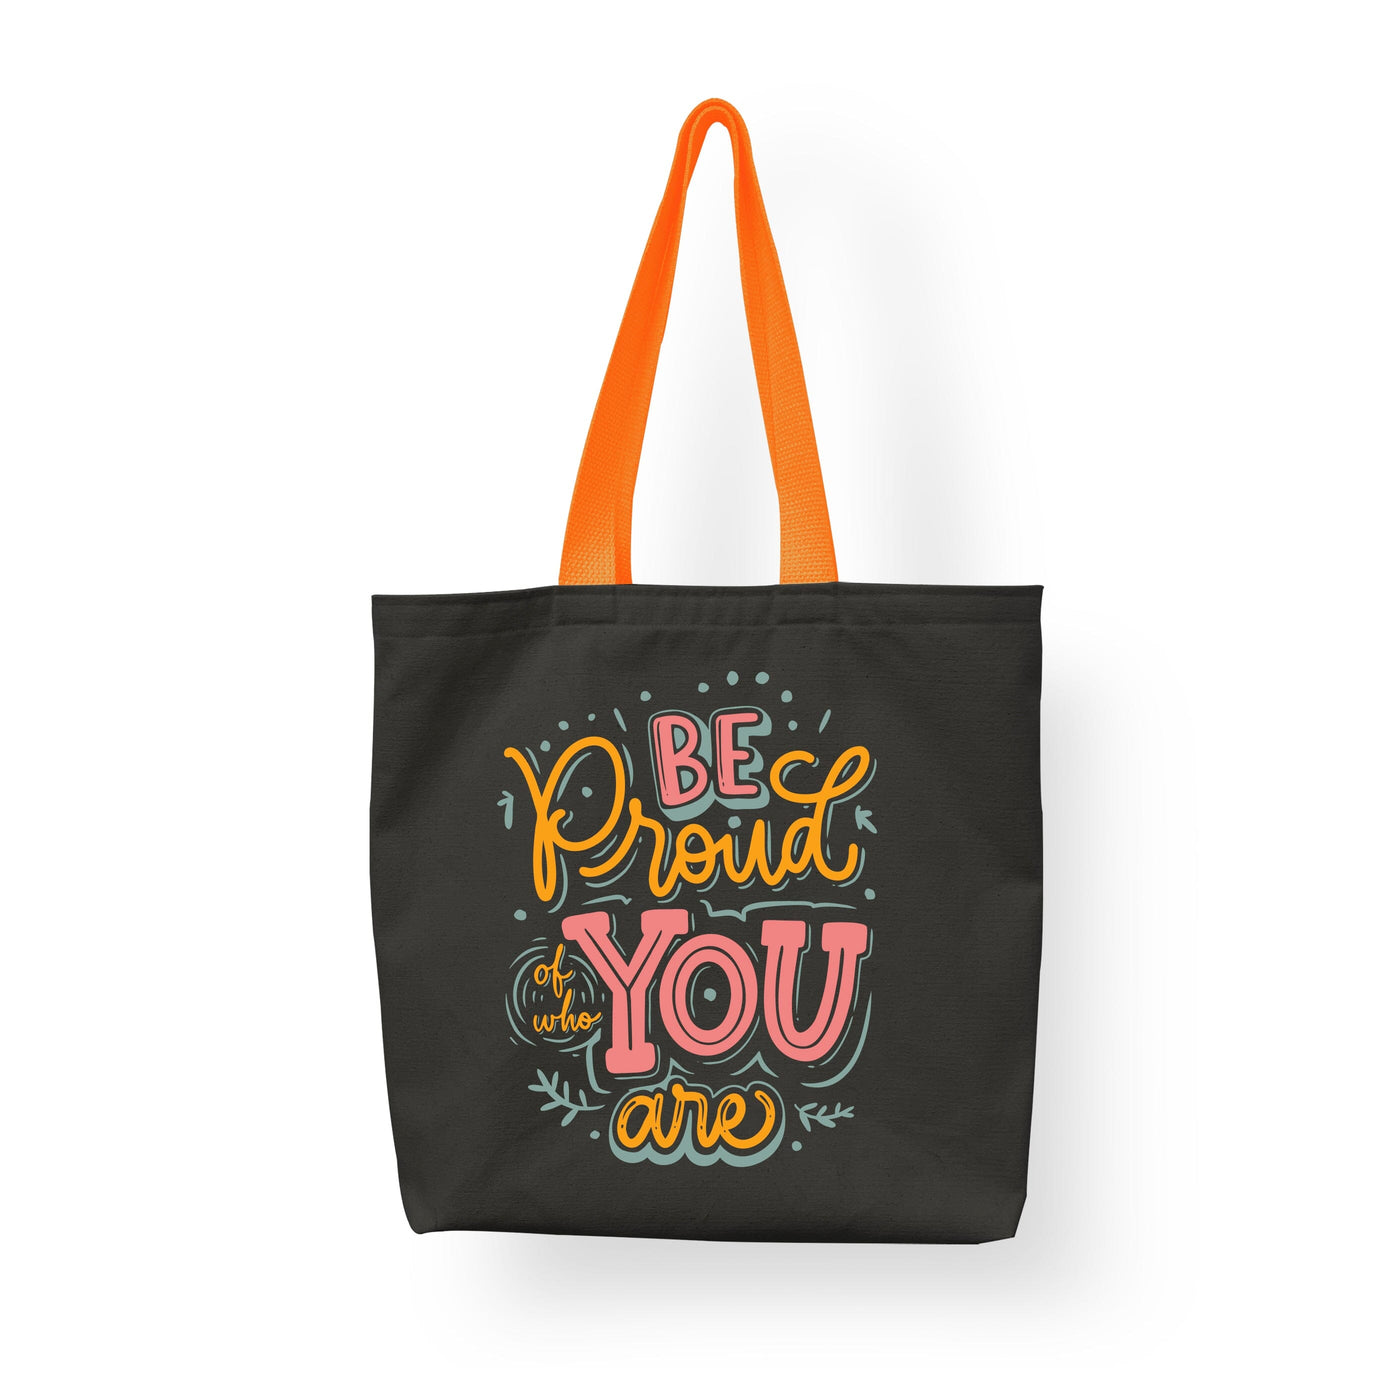 Be Proud of Who You Are - Cotton Shopping Tote Bag for Eco-Friendly Shoppers, Teacher Bag, Reusable Tote Bag | Sam and Zoey Fashion Tote Tote Sam + Zoey  Sam + Zoey